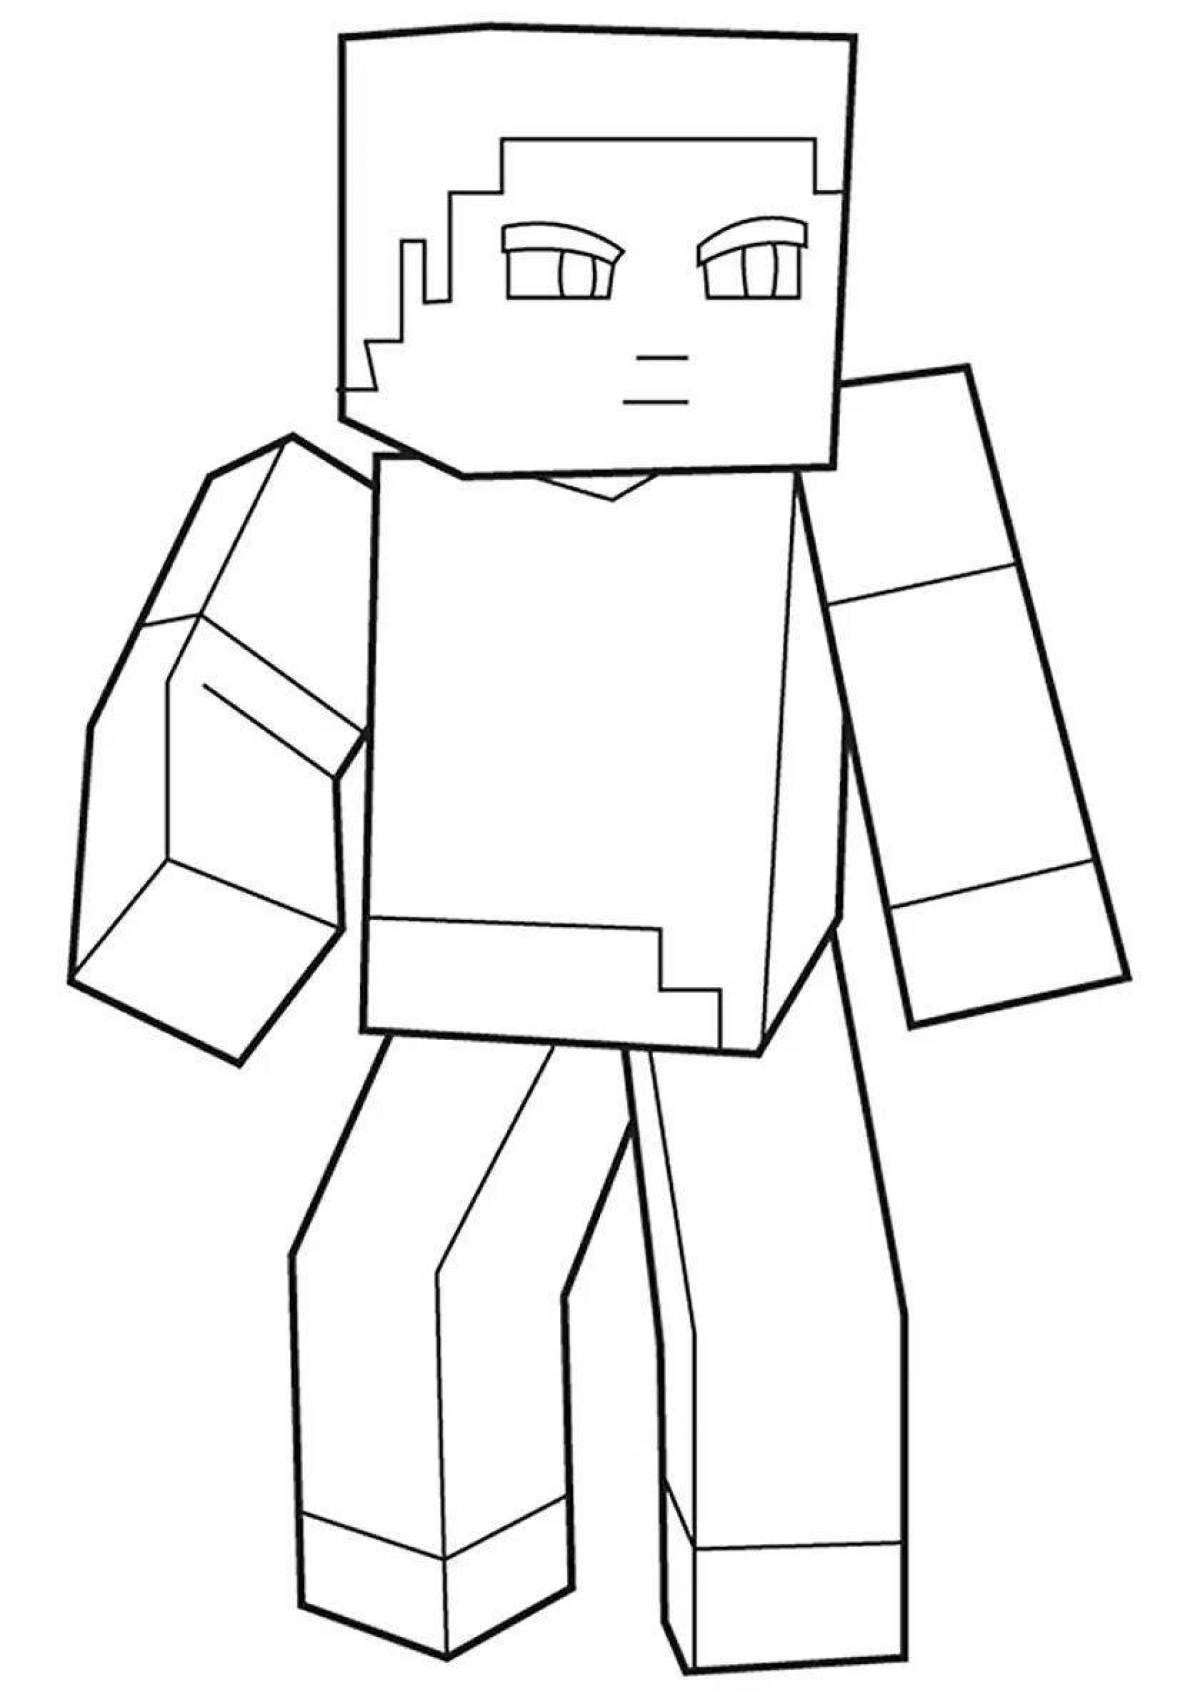 Coloring minecraft man with crazy color